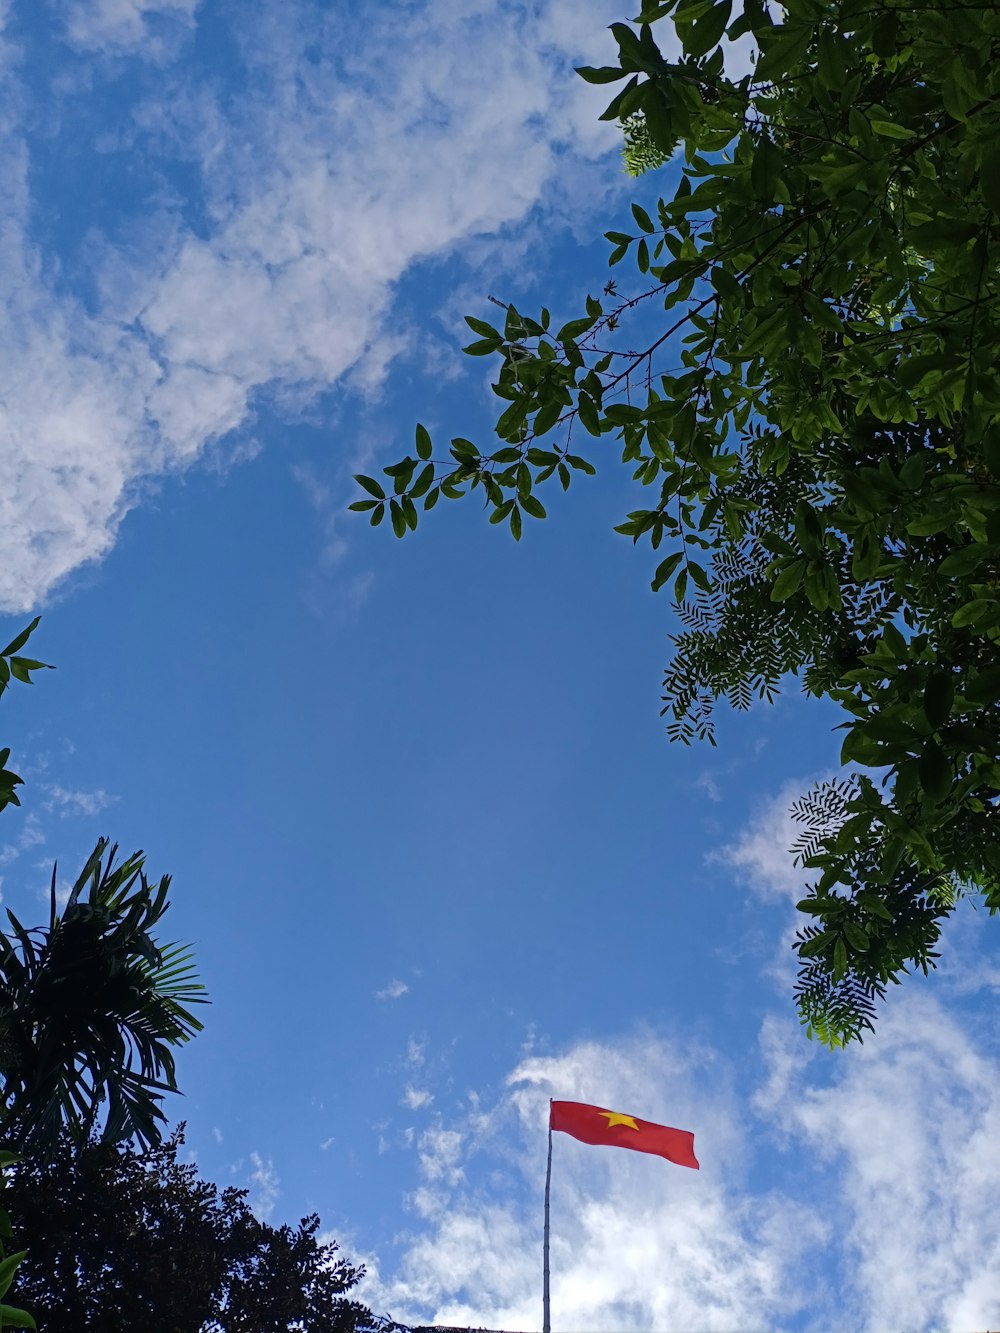 a red and yellow flag flying in the sky